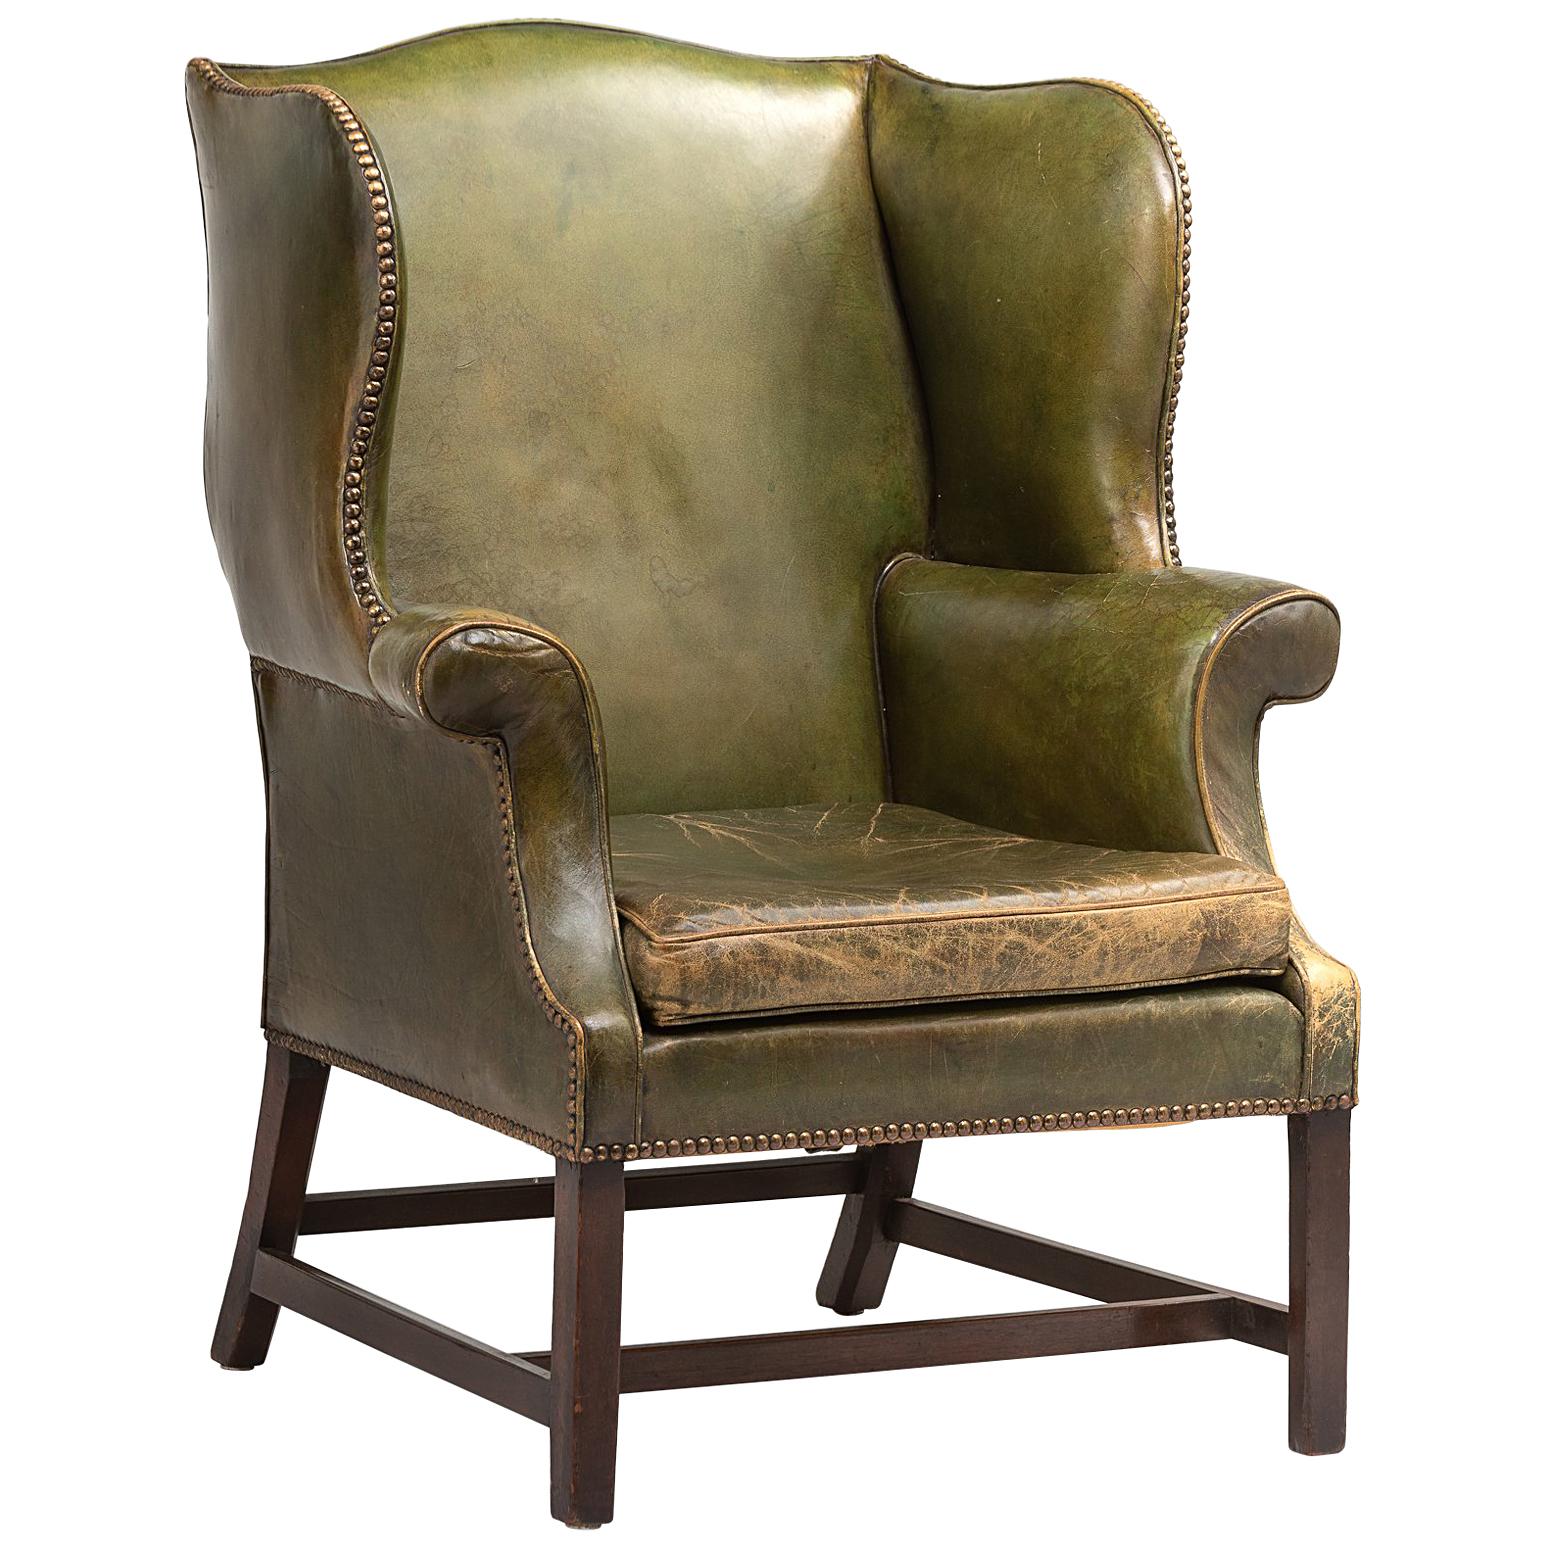 Green Leather Wingback Chair, England, circa 1920